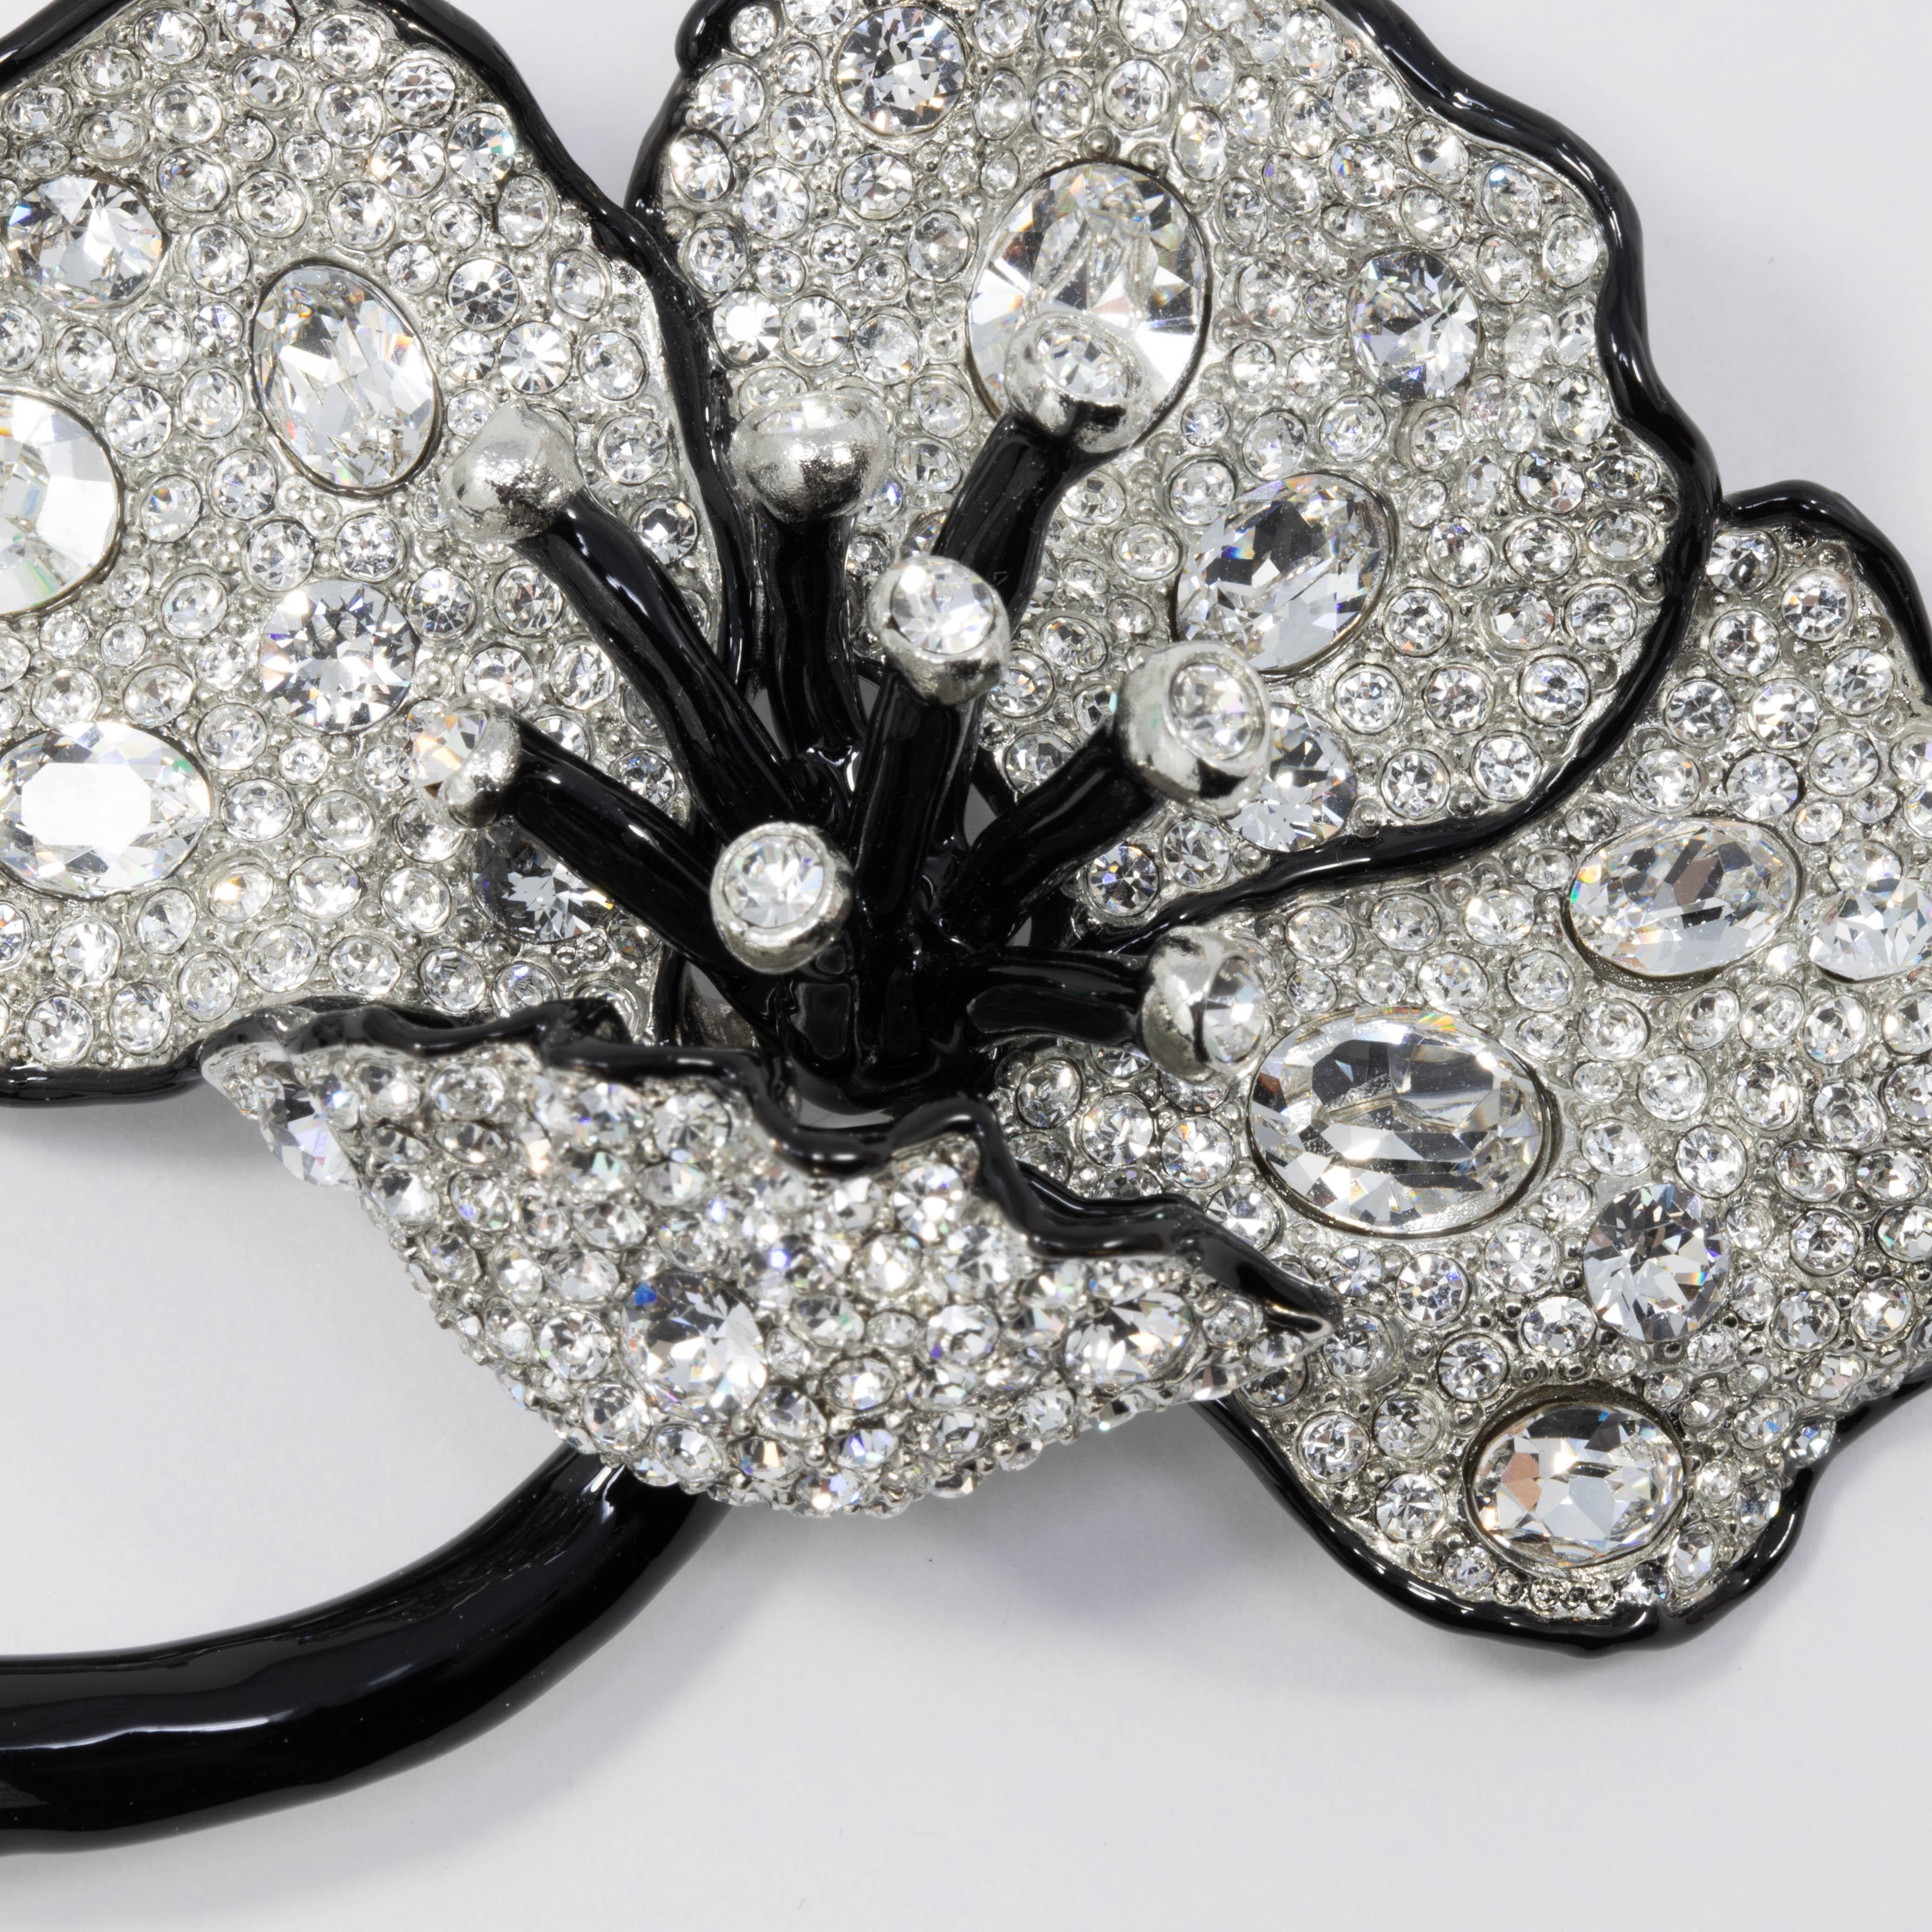 Exquisite poppy flower brooch by Kenneth Jay Lane. This pin brooch features a long black-enamel stem with sparkling pave-crystal petals, accented with a black enamel trim.
...

Clasp: Pin stem with safety clasp

Tags, Marks, Hallmarks: Kenneth © Lane